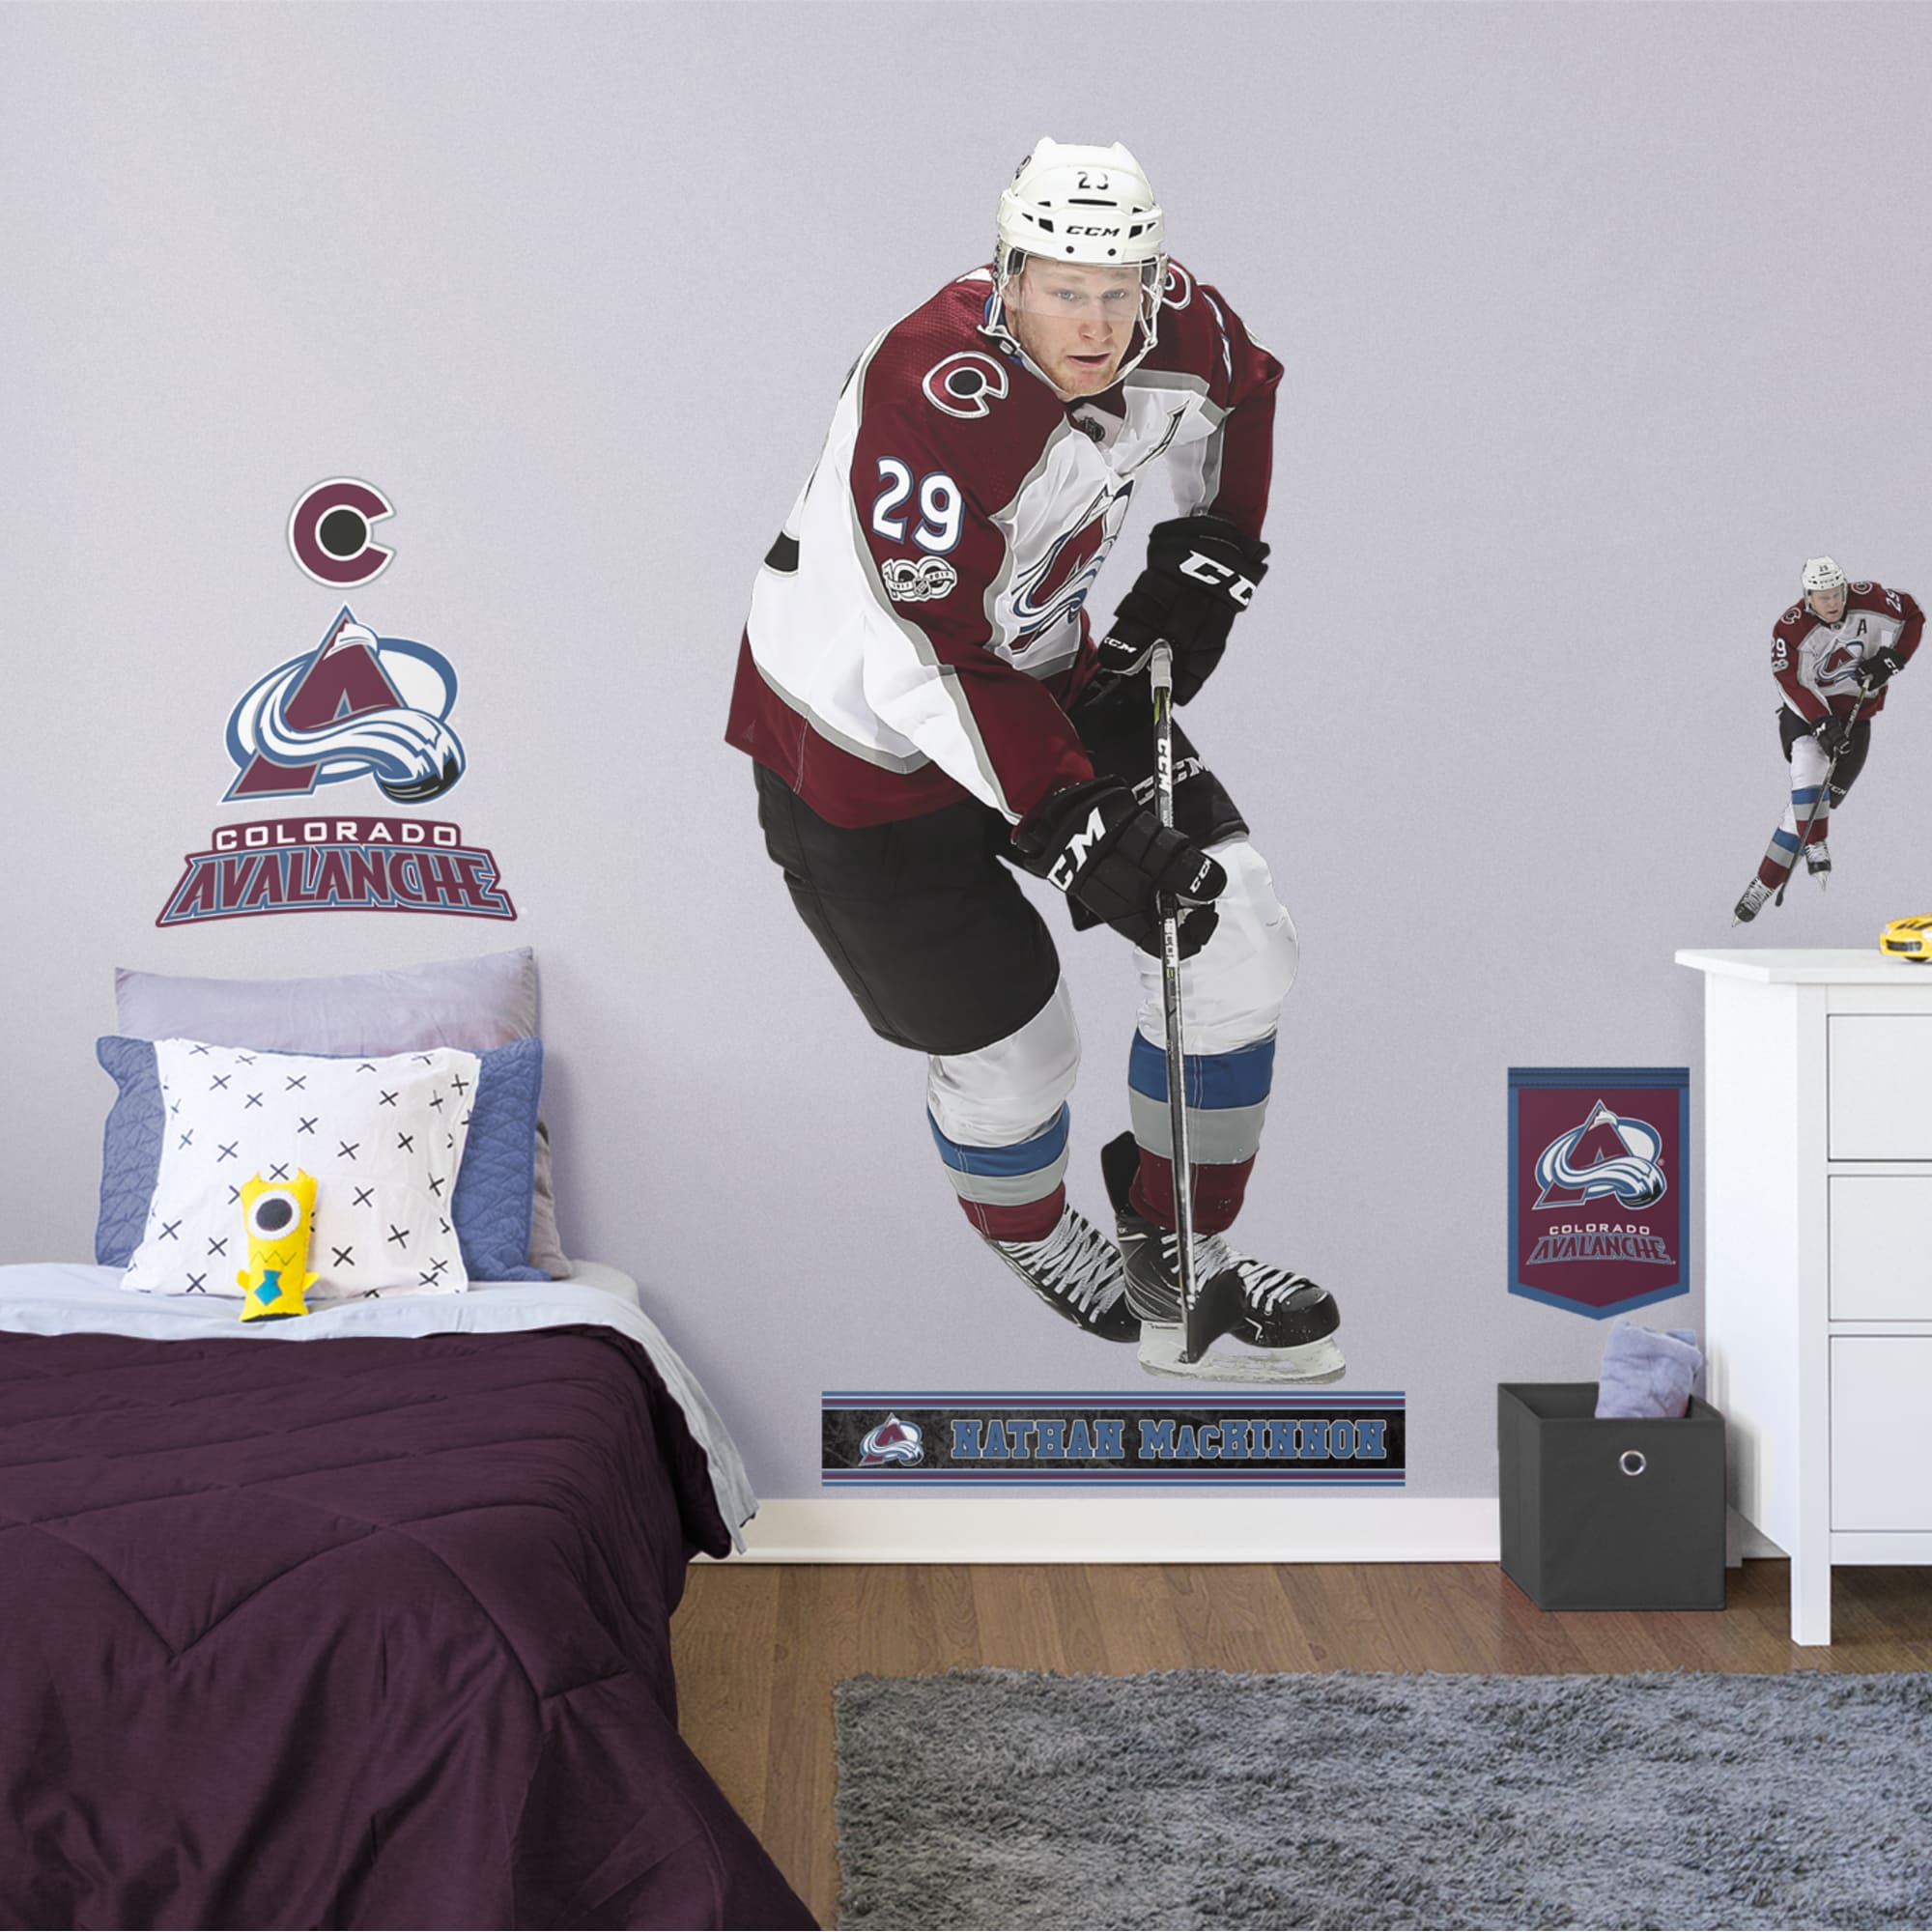 Nathan MacKinnon for Colorado Avalanche - Officially Licensed NHL Removable Wall Decal Life-Size Athlete + 9 Decals (38"W x 77"H